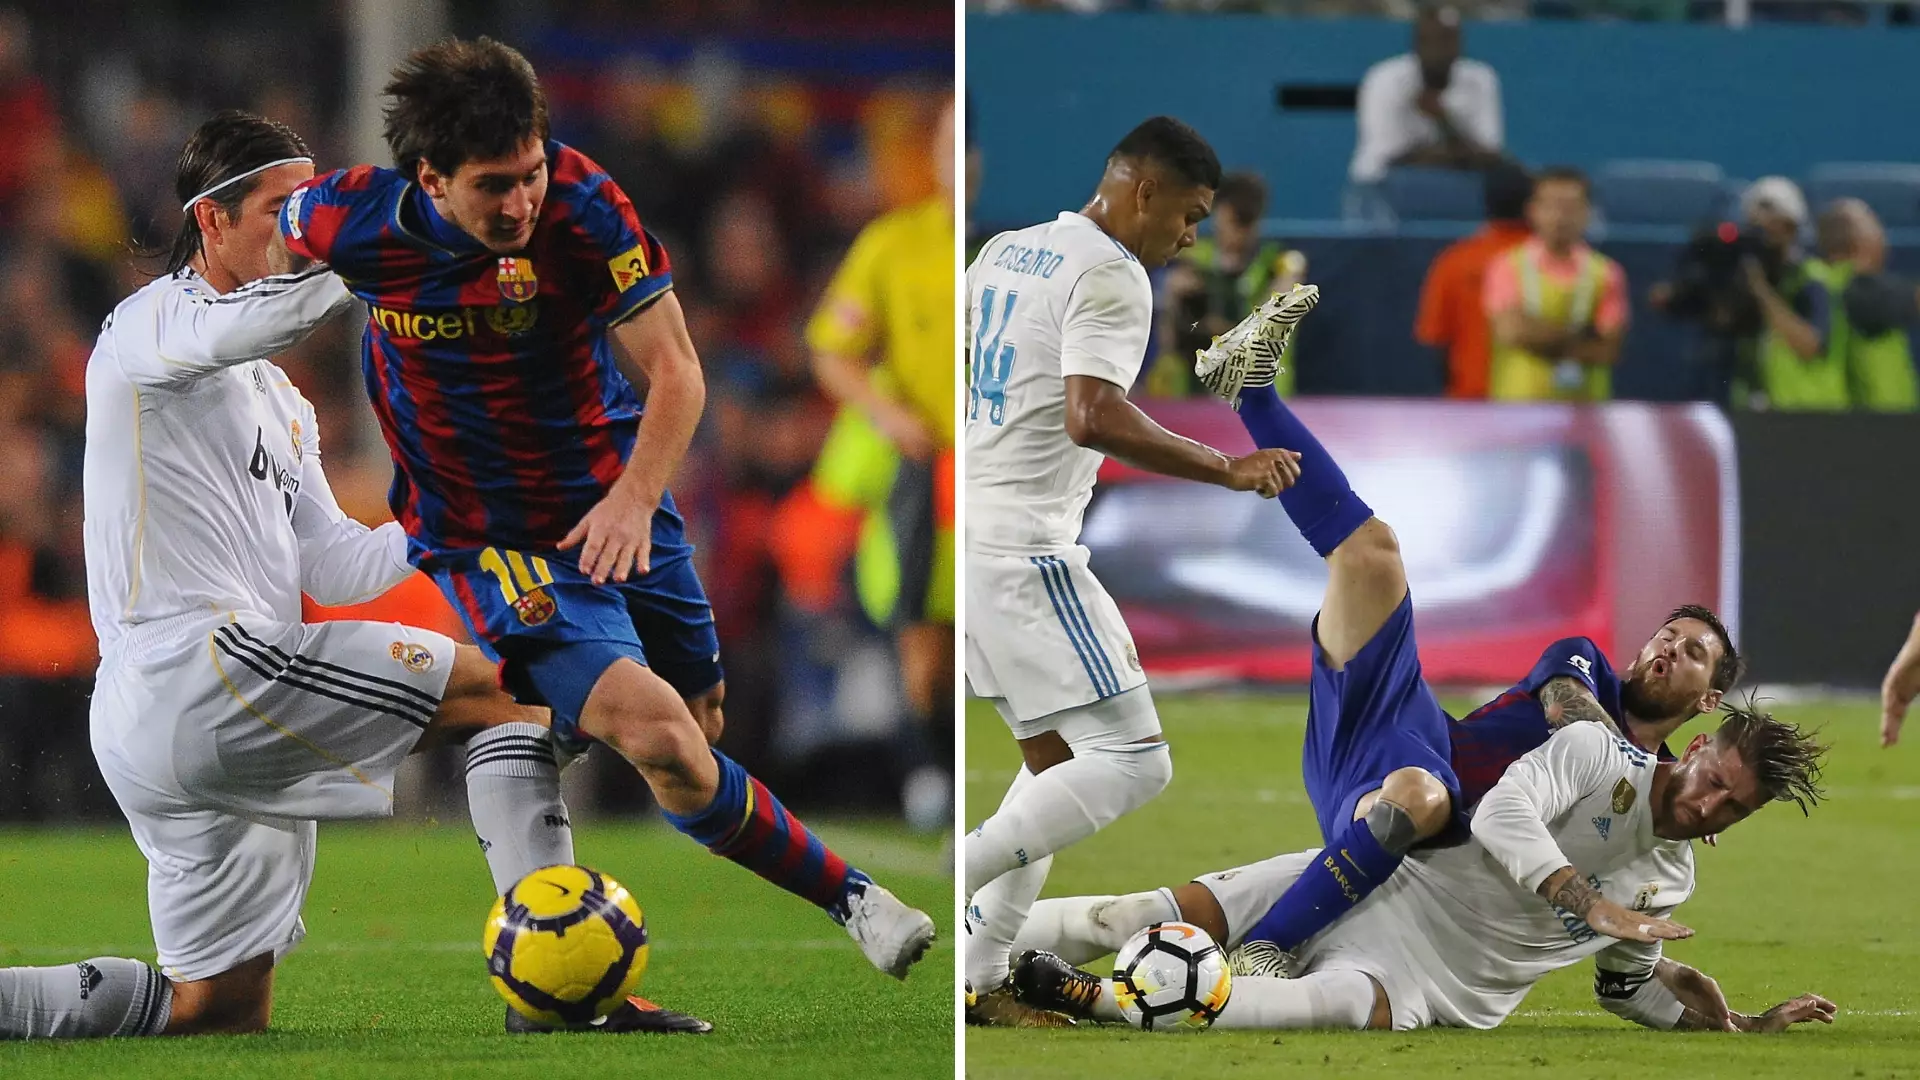 Twitter User Creates Compilation Video Of Sergio Ramos' Questionable Tackles On Lionel Messi